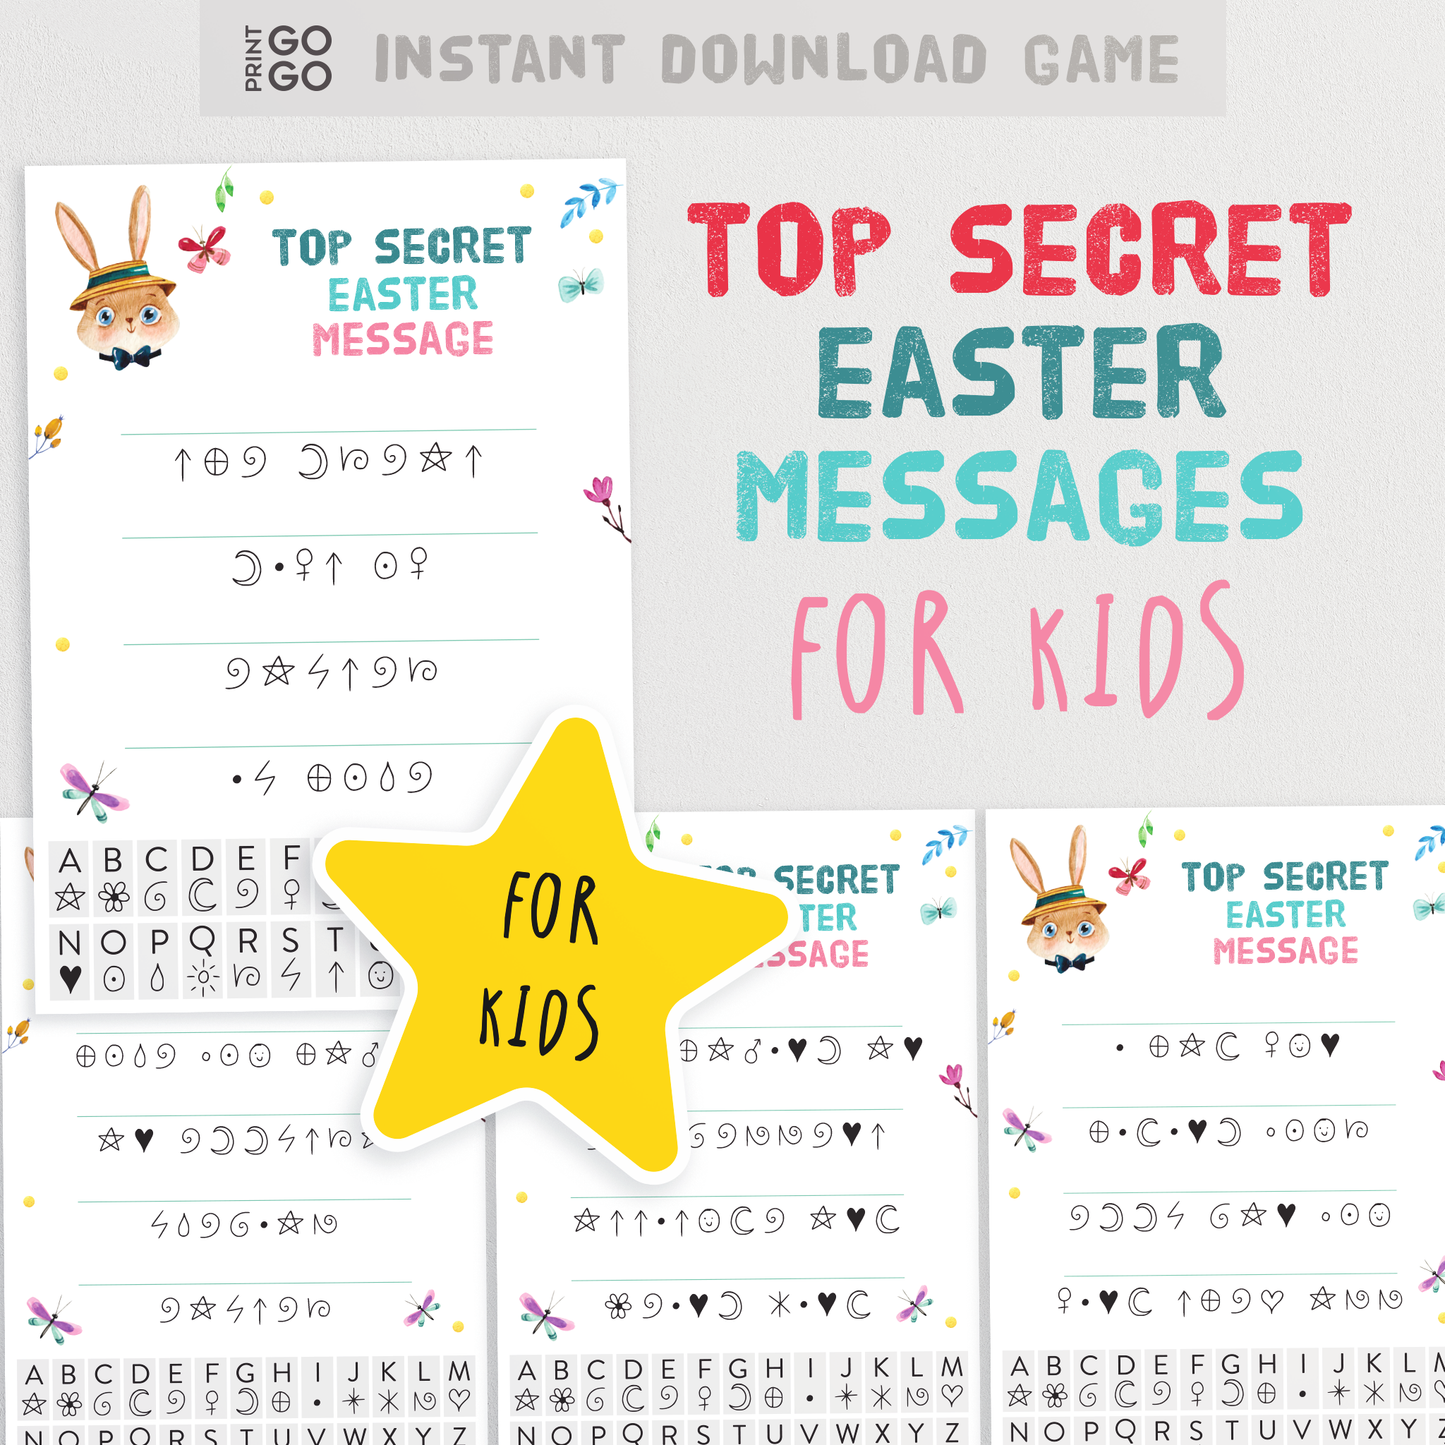 Easter Bunny Coded Secret Messages - The Fun Alternative Activity to an Egg Hunt for Kids